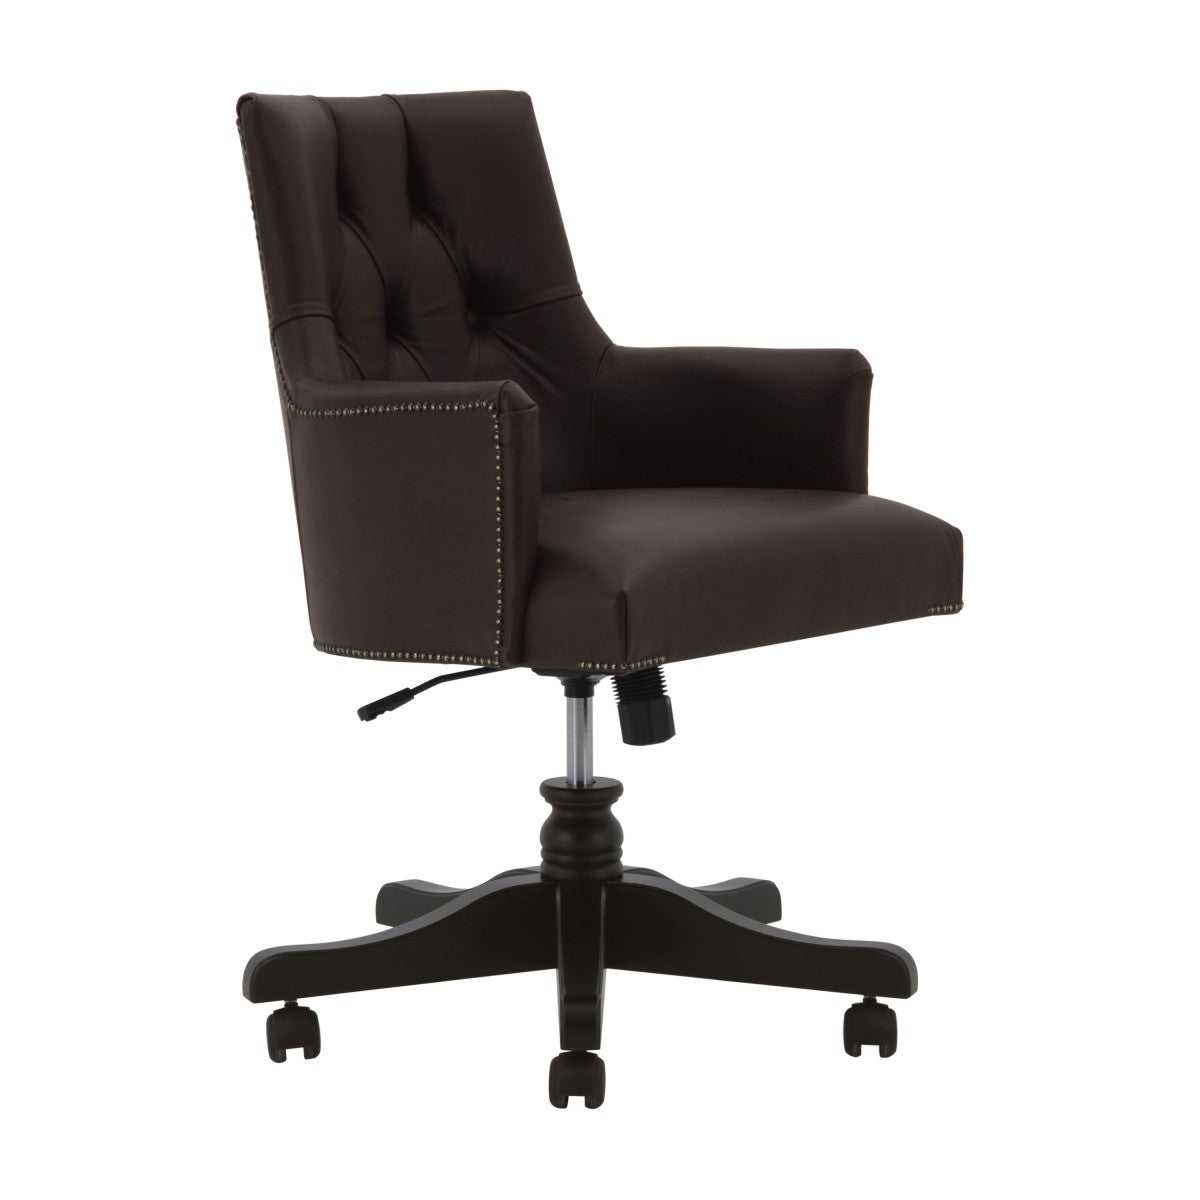 Edward Bespoke Upholstered Luxury Executive Swivel Office Desk Chair MS810A Custom Made To Order